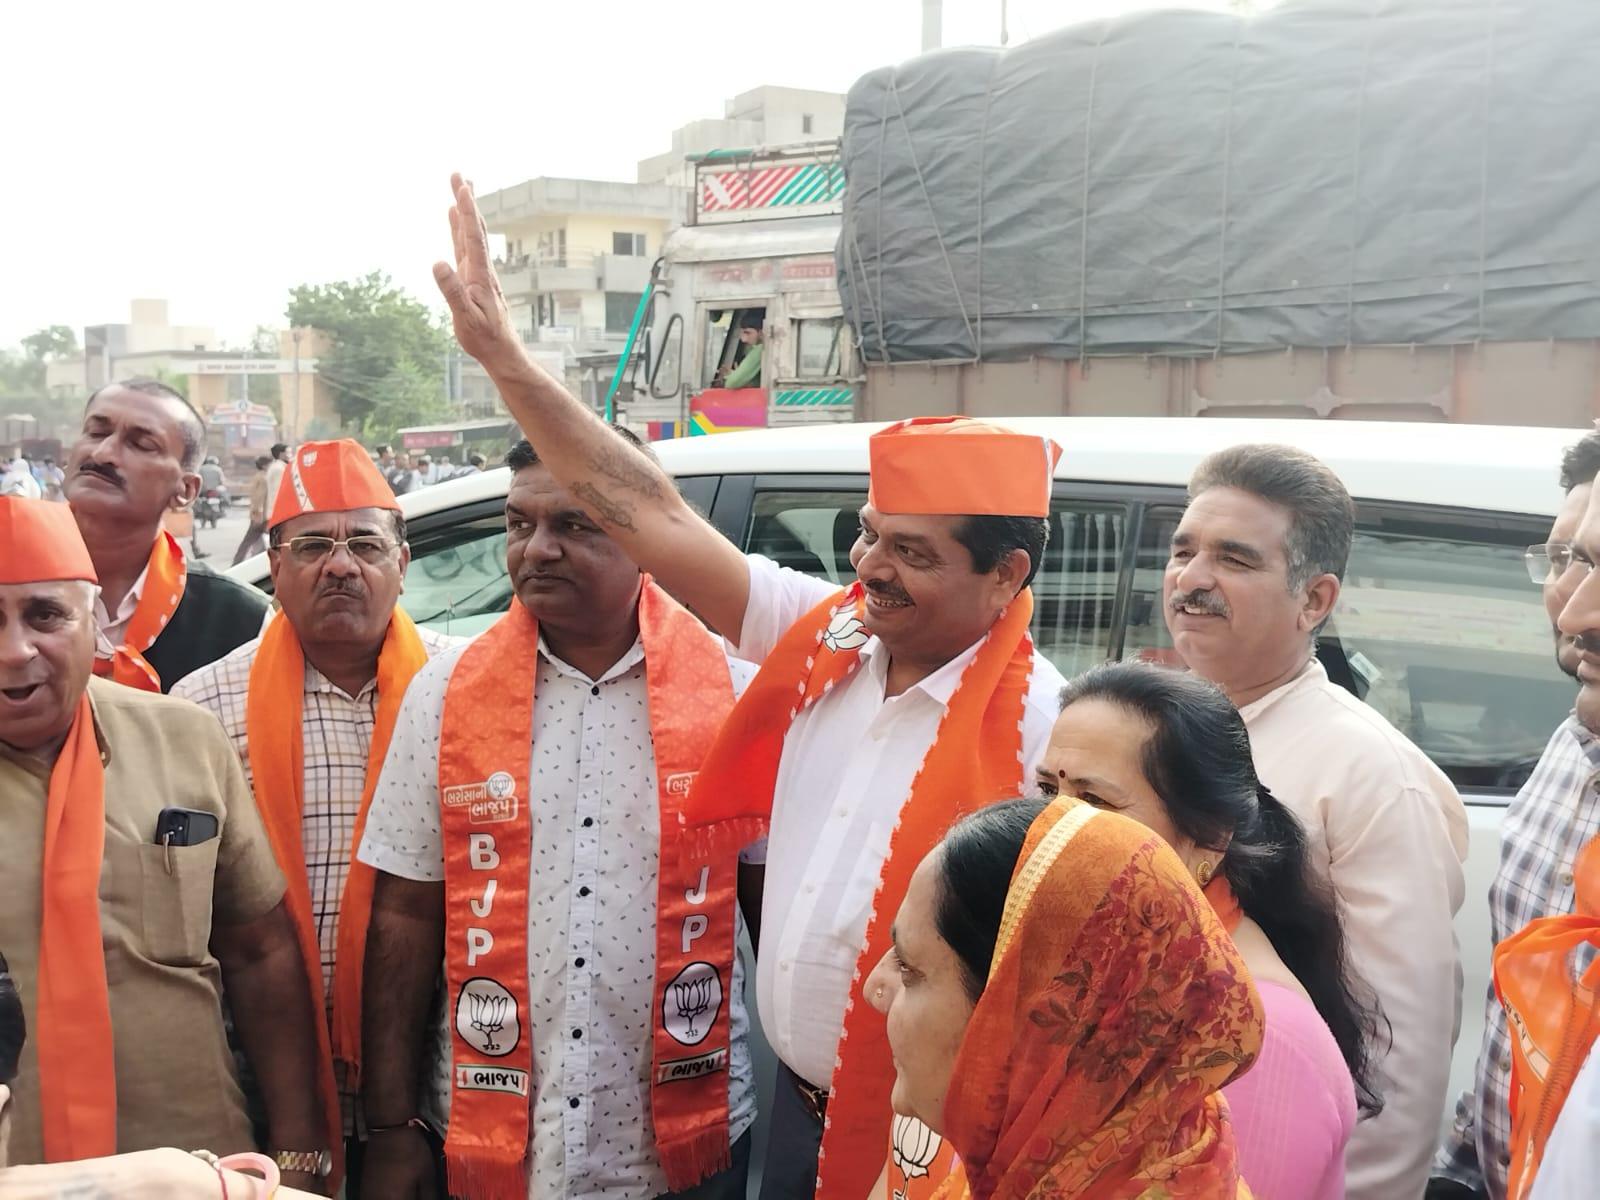 Sehore city BJP launched voter awareness campaign, going door to door to register Navin Yuva Dhan who completed 18 years as a voter.